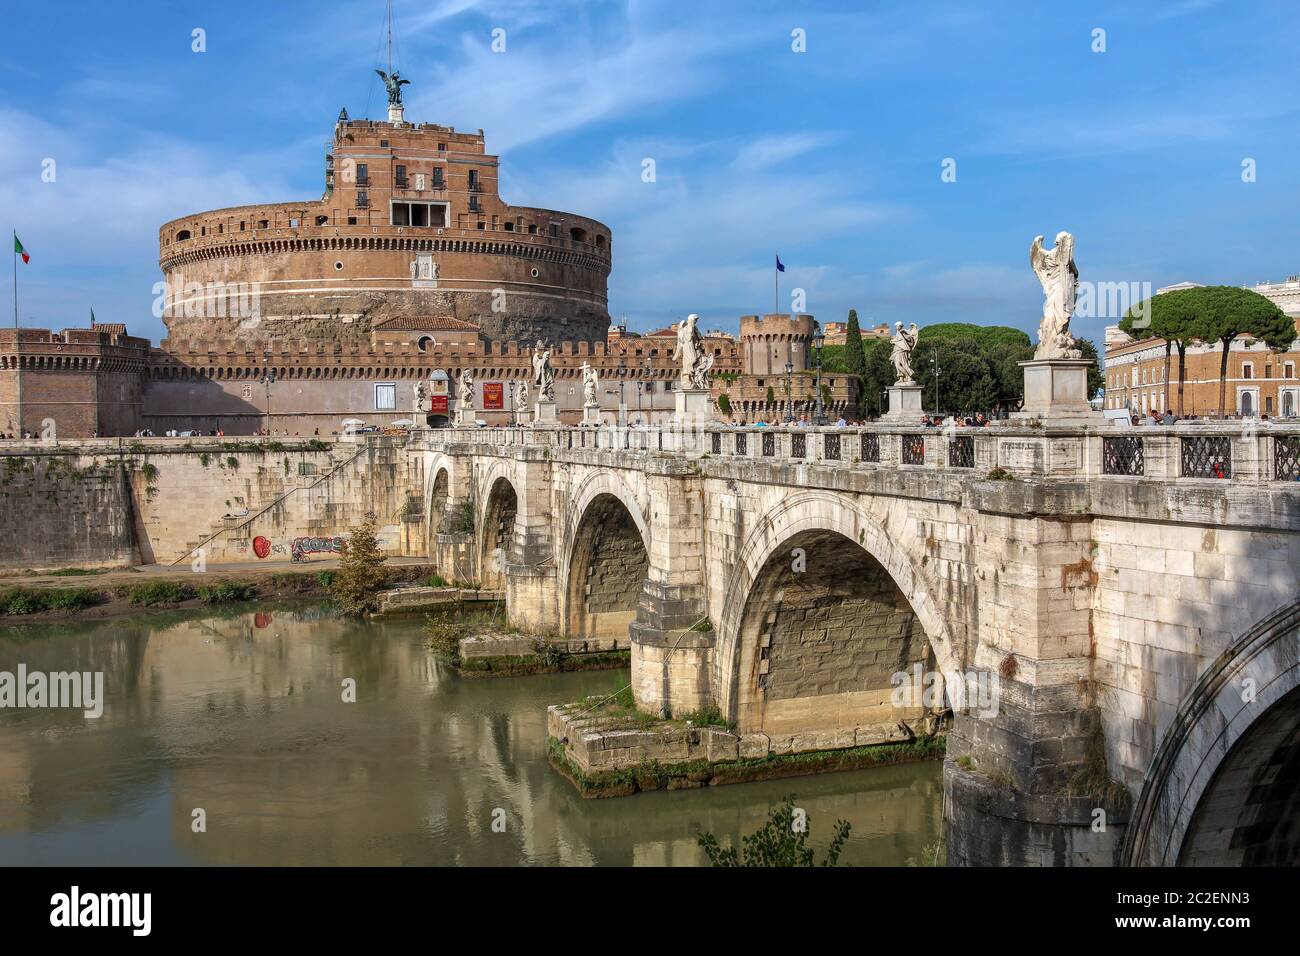 Castel Sant'Angelo (The Castle of the Holy Angel or Mausoleum of Hadrian) in Rome, Italy. Stock Photo